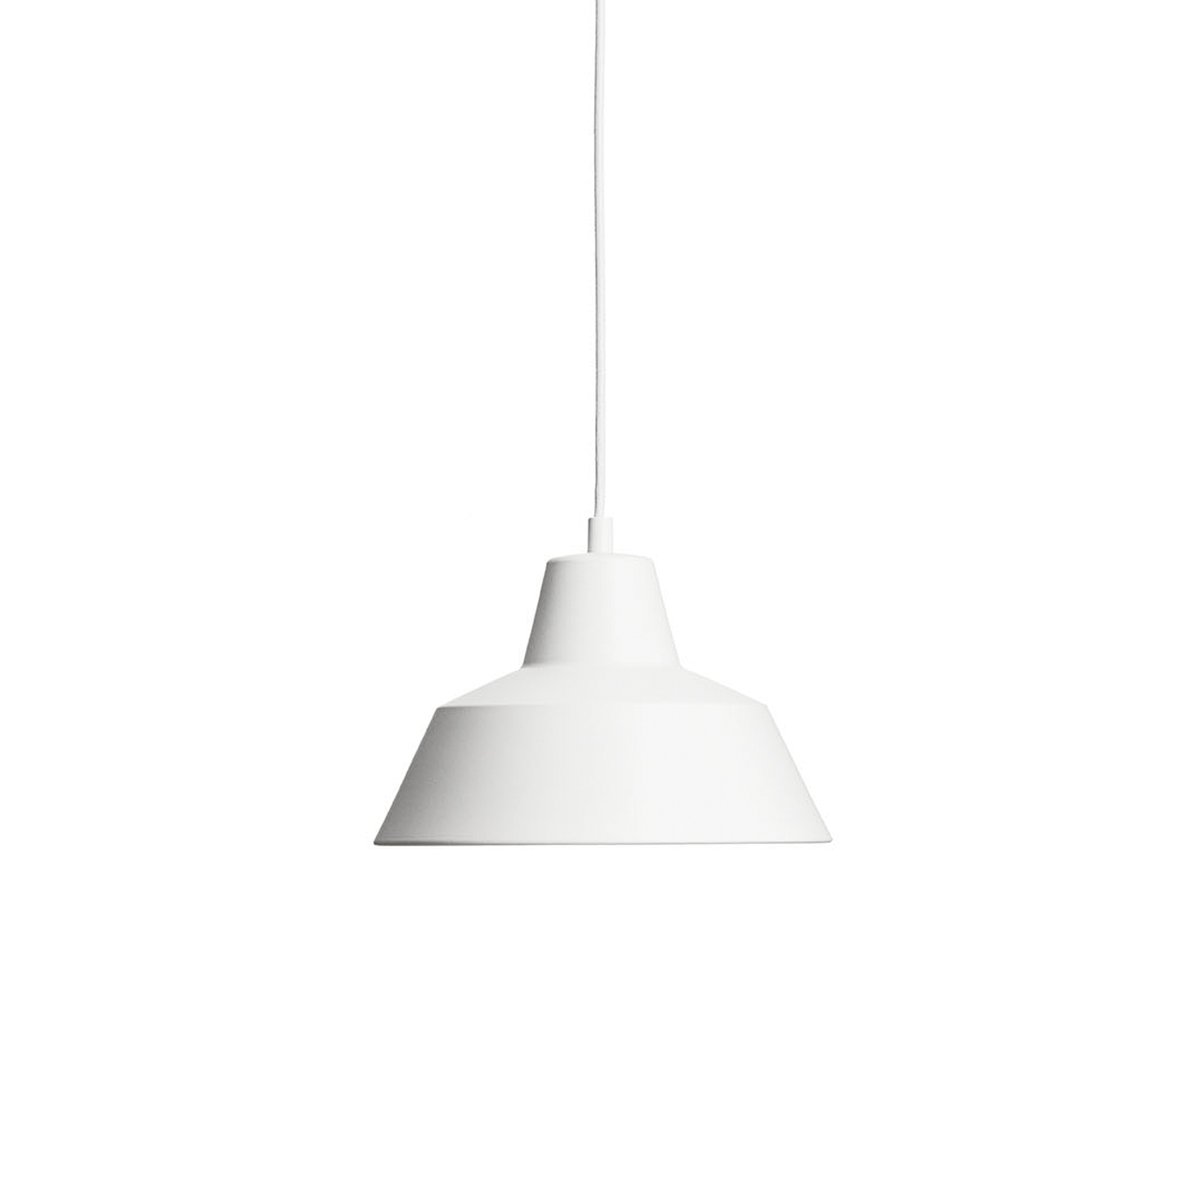 Made by Hand, Workshop Pendant Lamp W2, Matte White, Pendant,